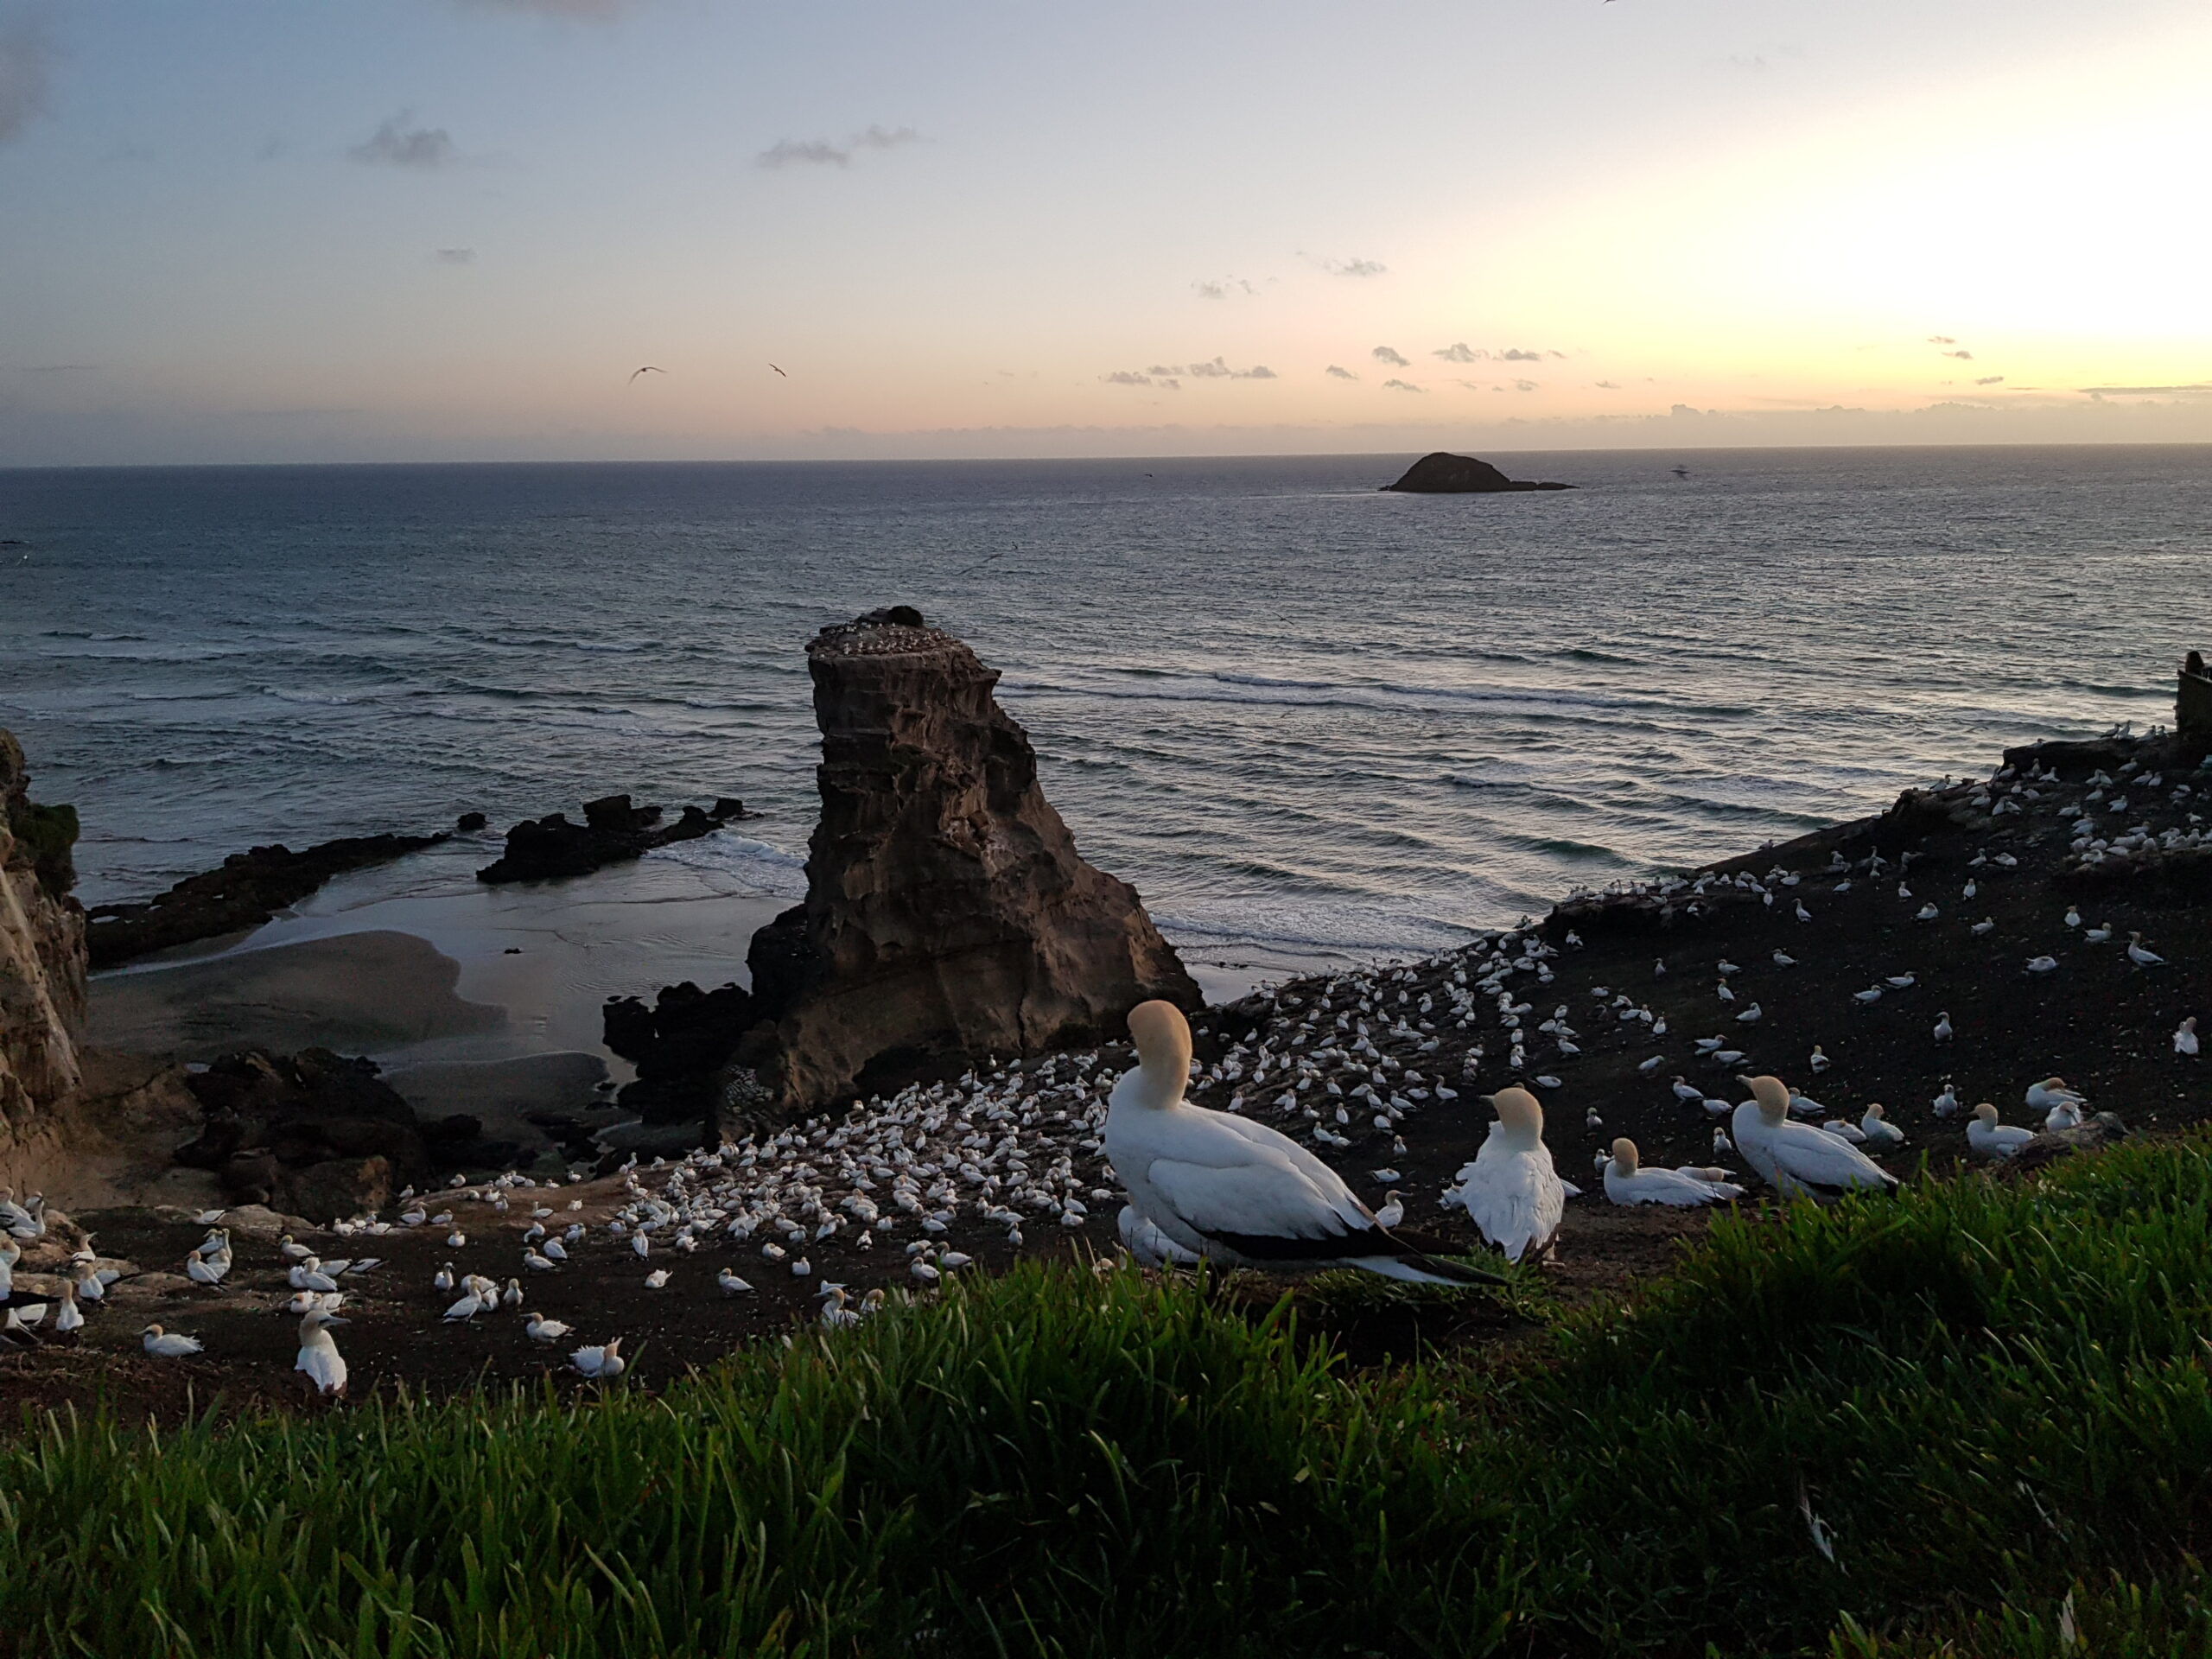 View across gannet colony with a gannet in the foreground and a large rock in the ocean behind.